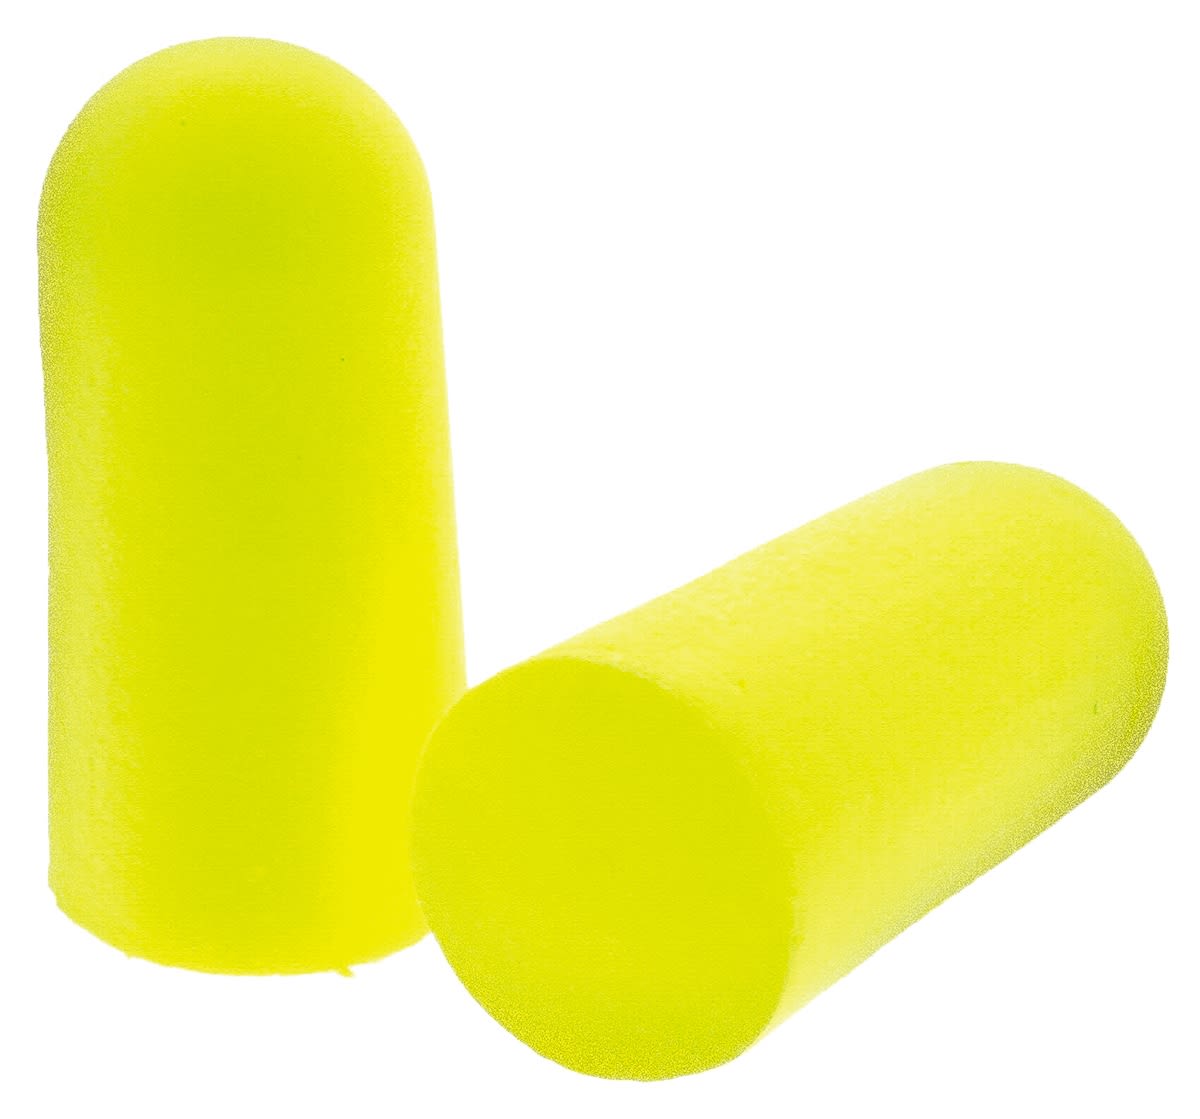 3M E.A.R Soft Yellow Neons Uncorded Disposable Ear Plugs, 36dB, Yellow, 250 Pairs per Package